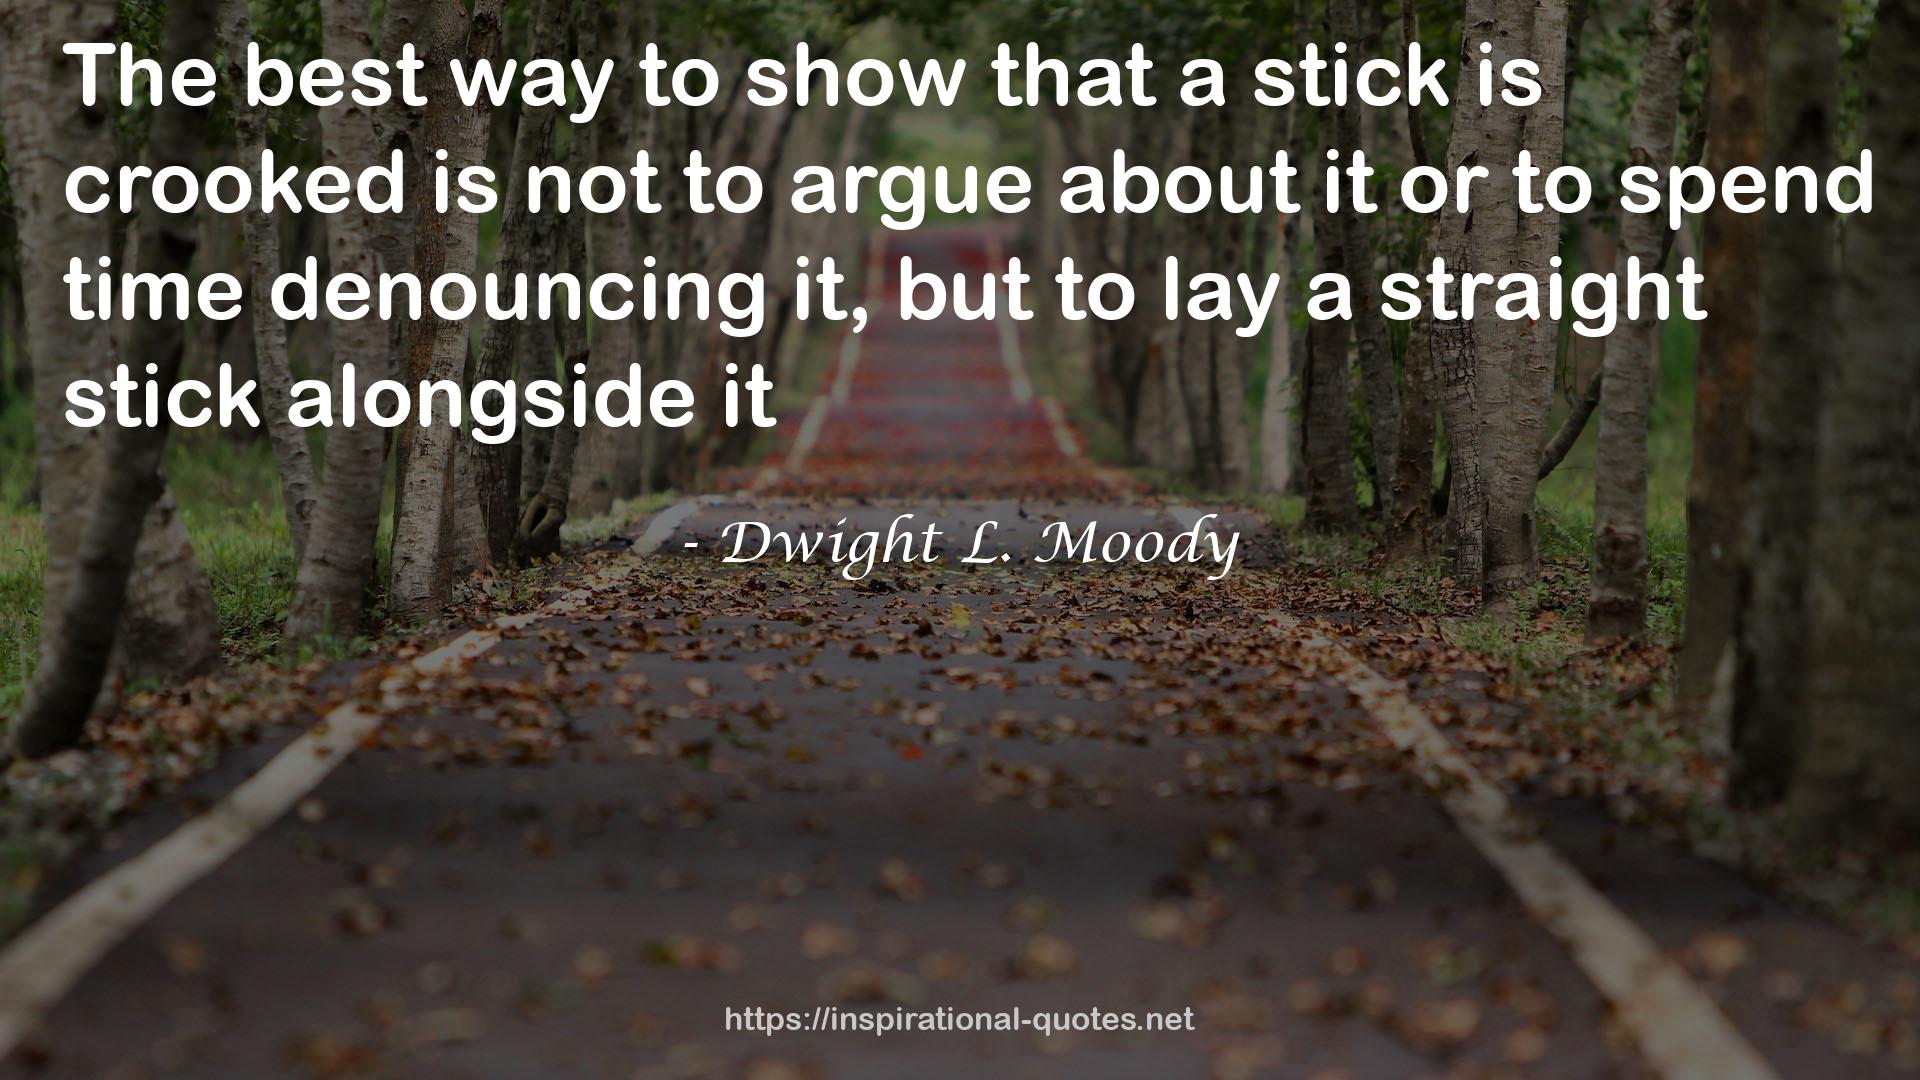 Dwight L. Moody QUOTES